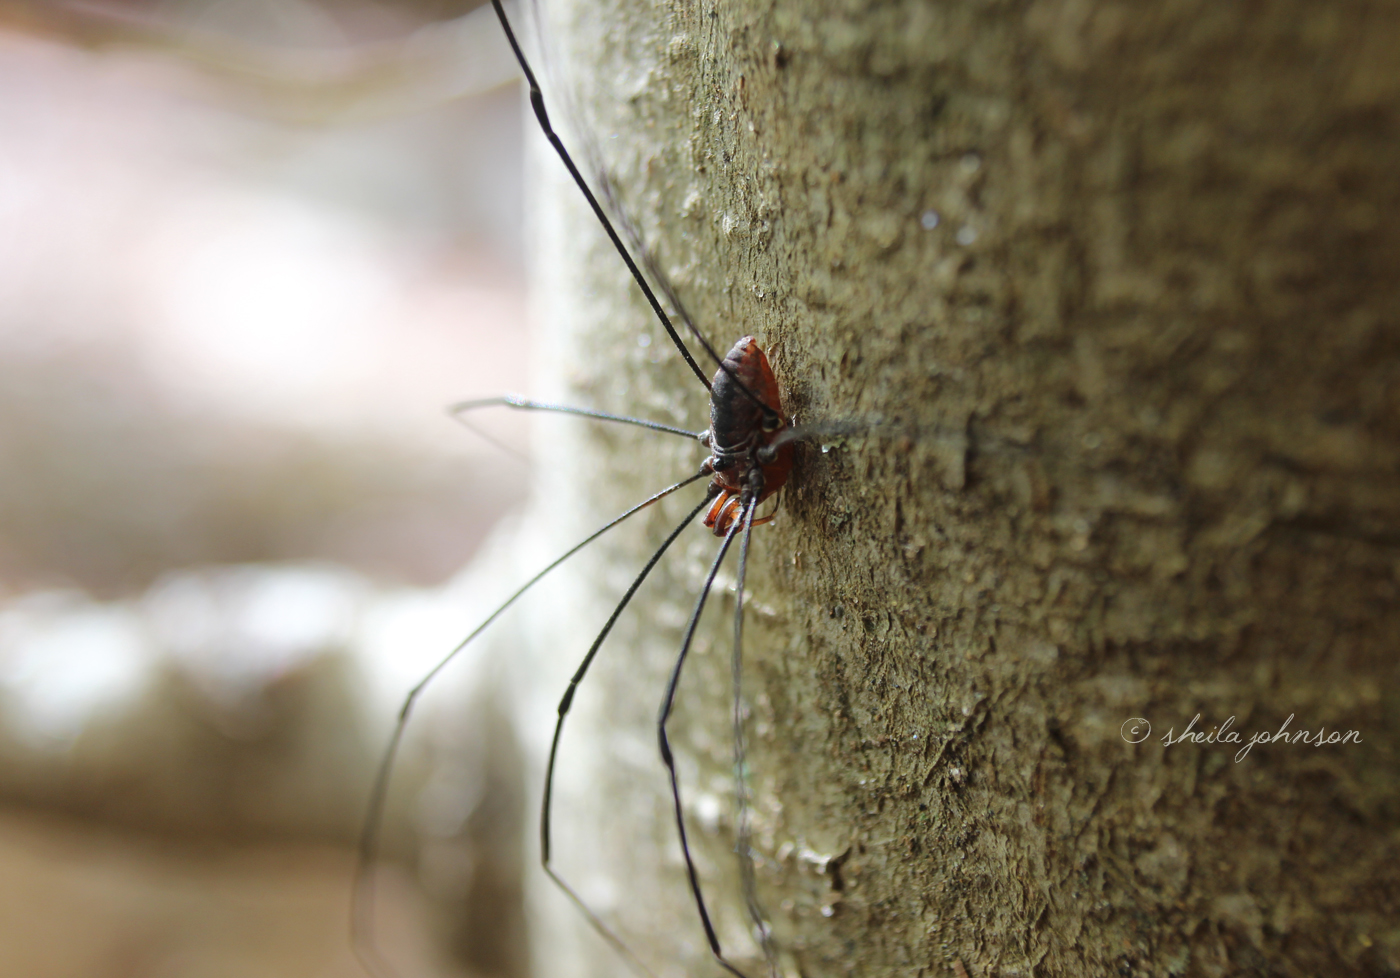 Yes, It&#039;S A Spider. And One Of Our Favorite Photos! The Daddy Longlegs Spider Allegedly Is Venomous, But The Fact Is They&#039;Re Harmless To Humans. We Found This One At The Base Of A Tree At Gunpowder Falls, Joppa, Maryland.